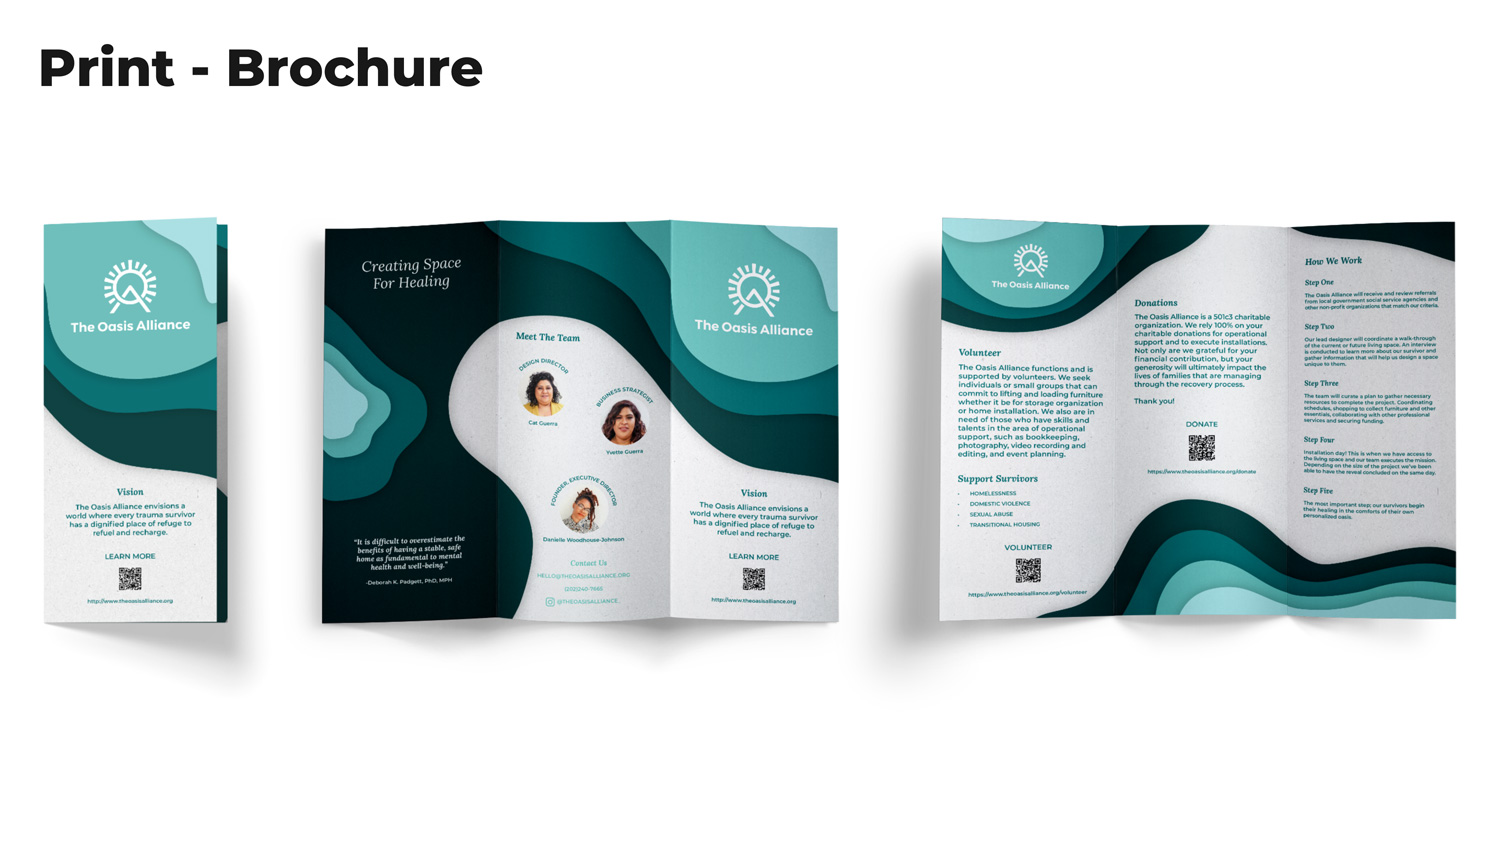 Printed tri-fold brochure 11 inches by 8.5 inches.